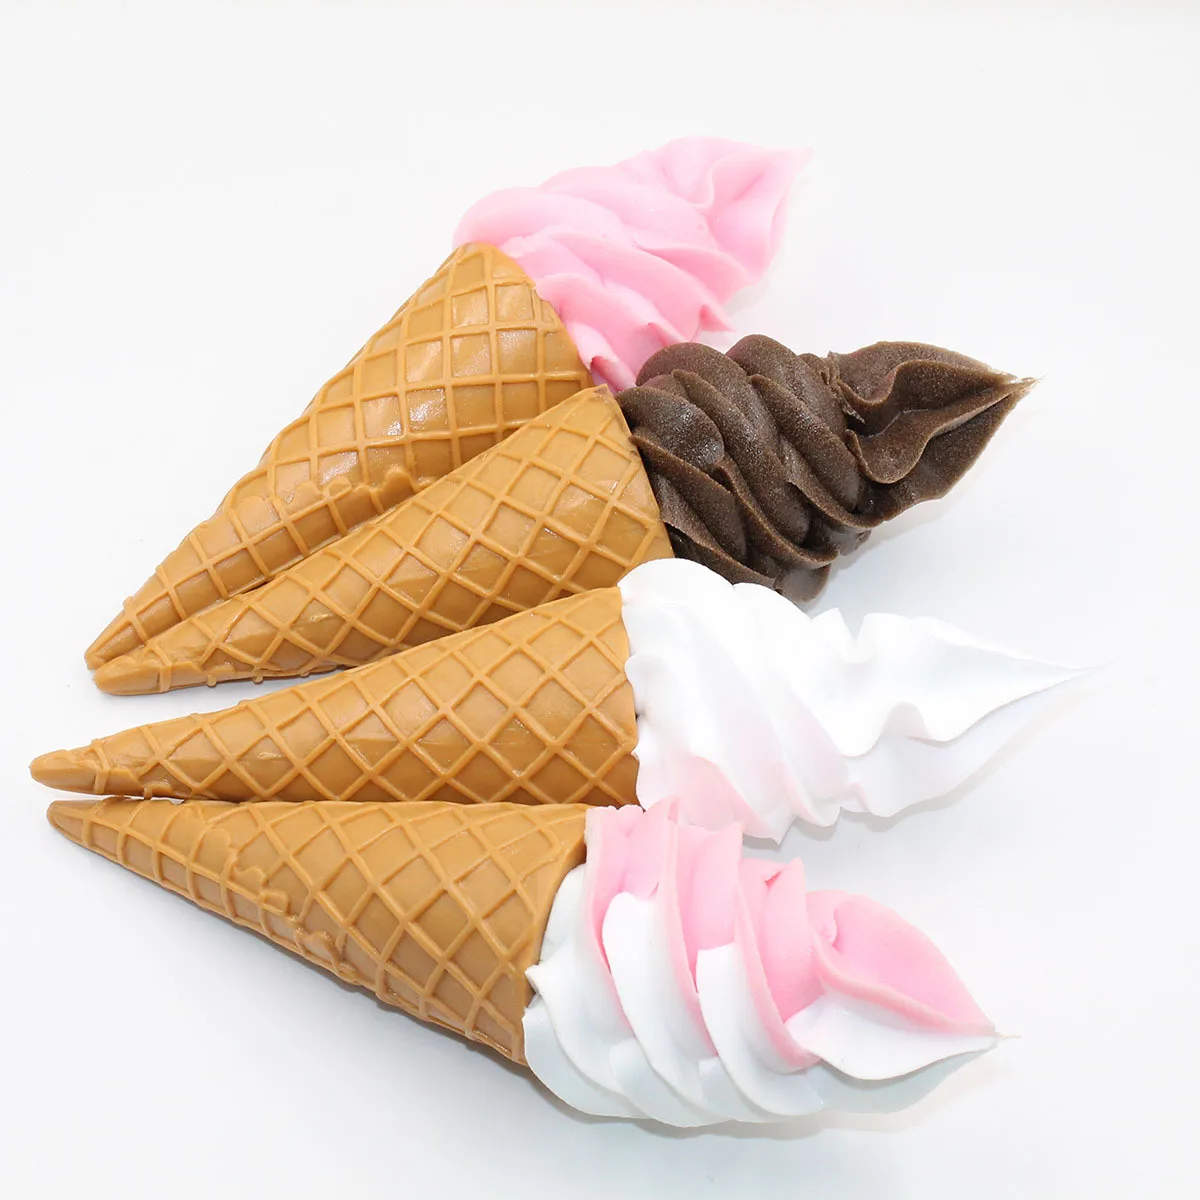 Simulation Ice Cream Cone Model Fake Ice Cream Cone Photography Props Commercial Food Model Store Window Display